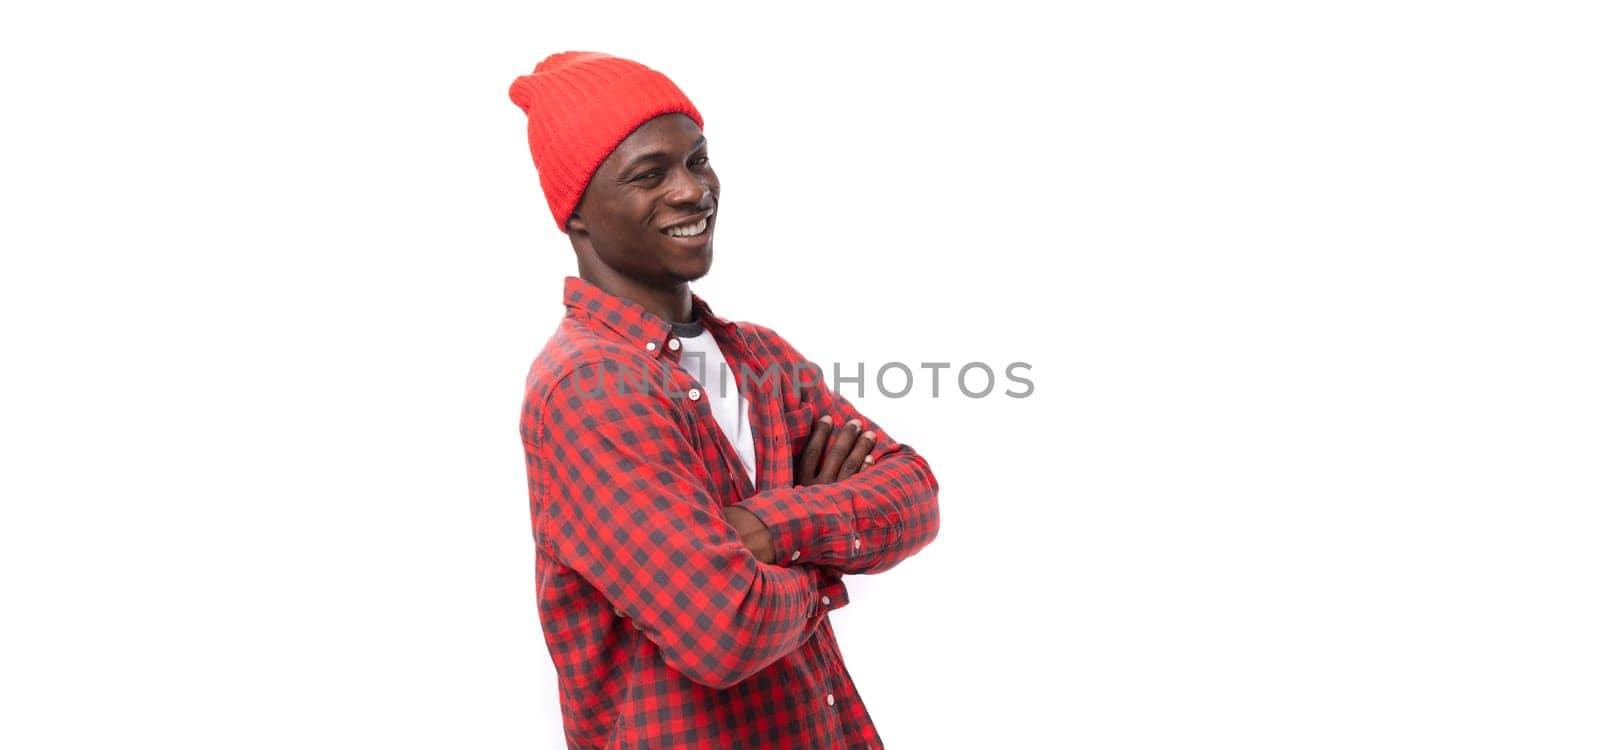 handsome embarrassed dark-skinned man in a casual plaid shirt of model appearance on a white background with copy space.